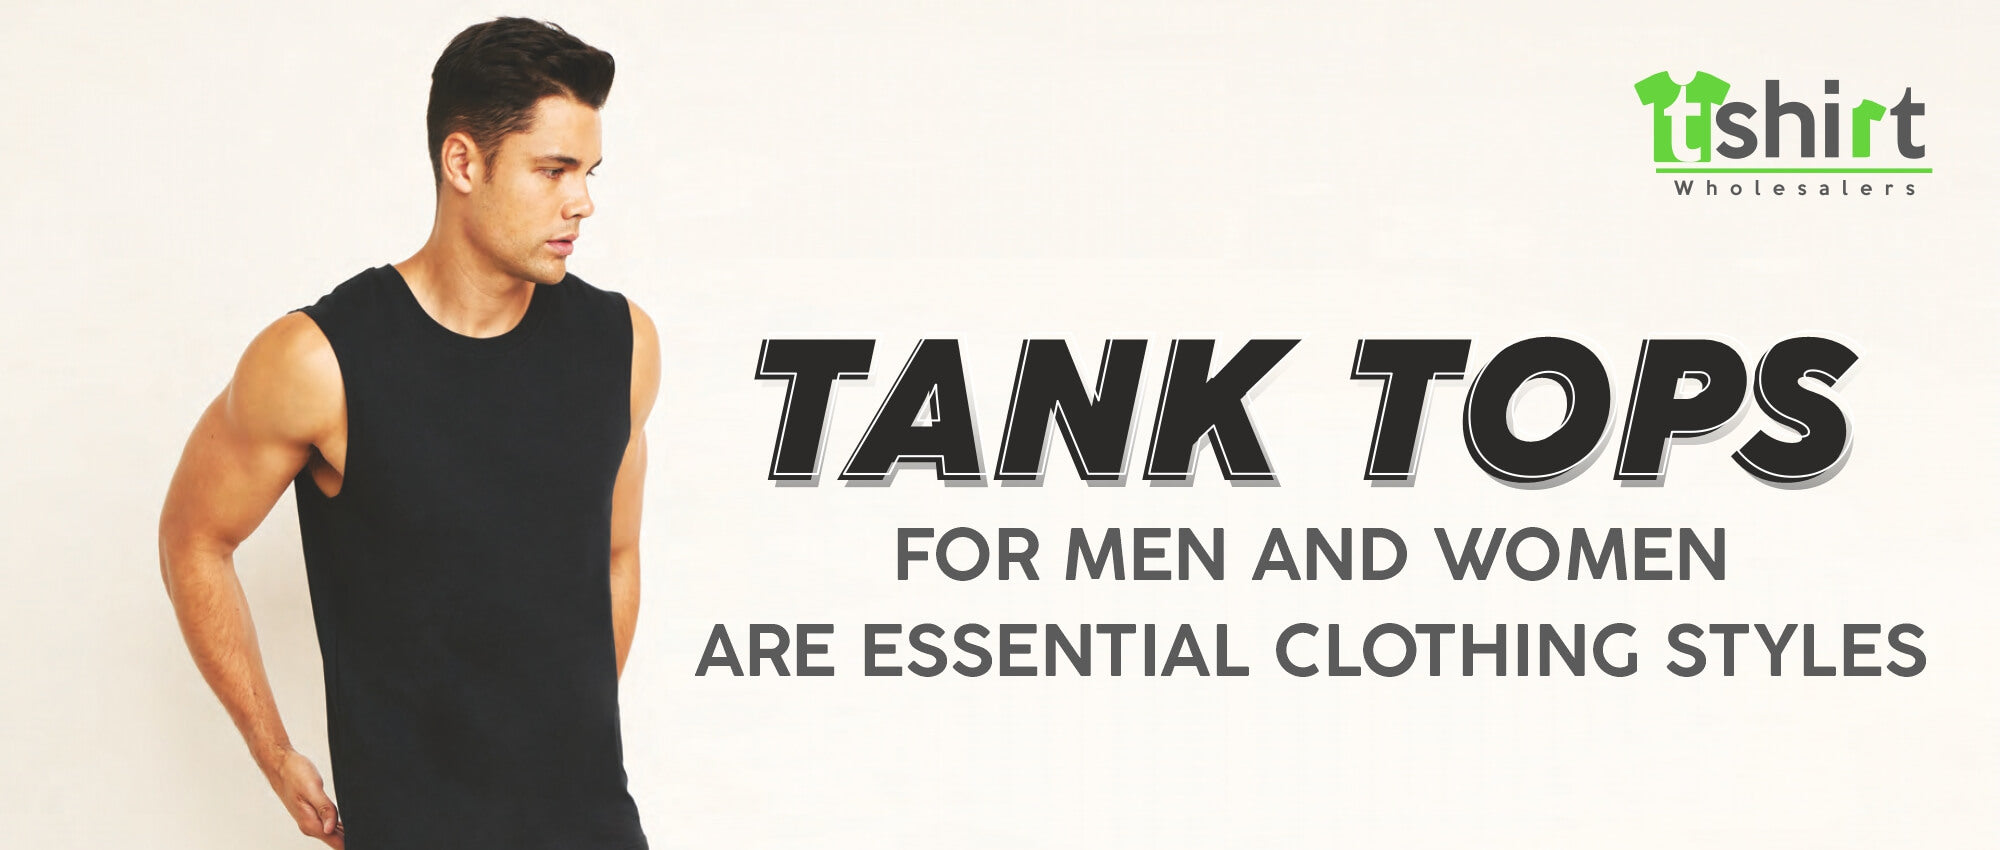 TANK TOPS FOR MEN AND WOMEN ARE ESSENTIAL CLOTHING STYLES